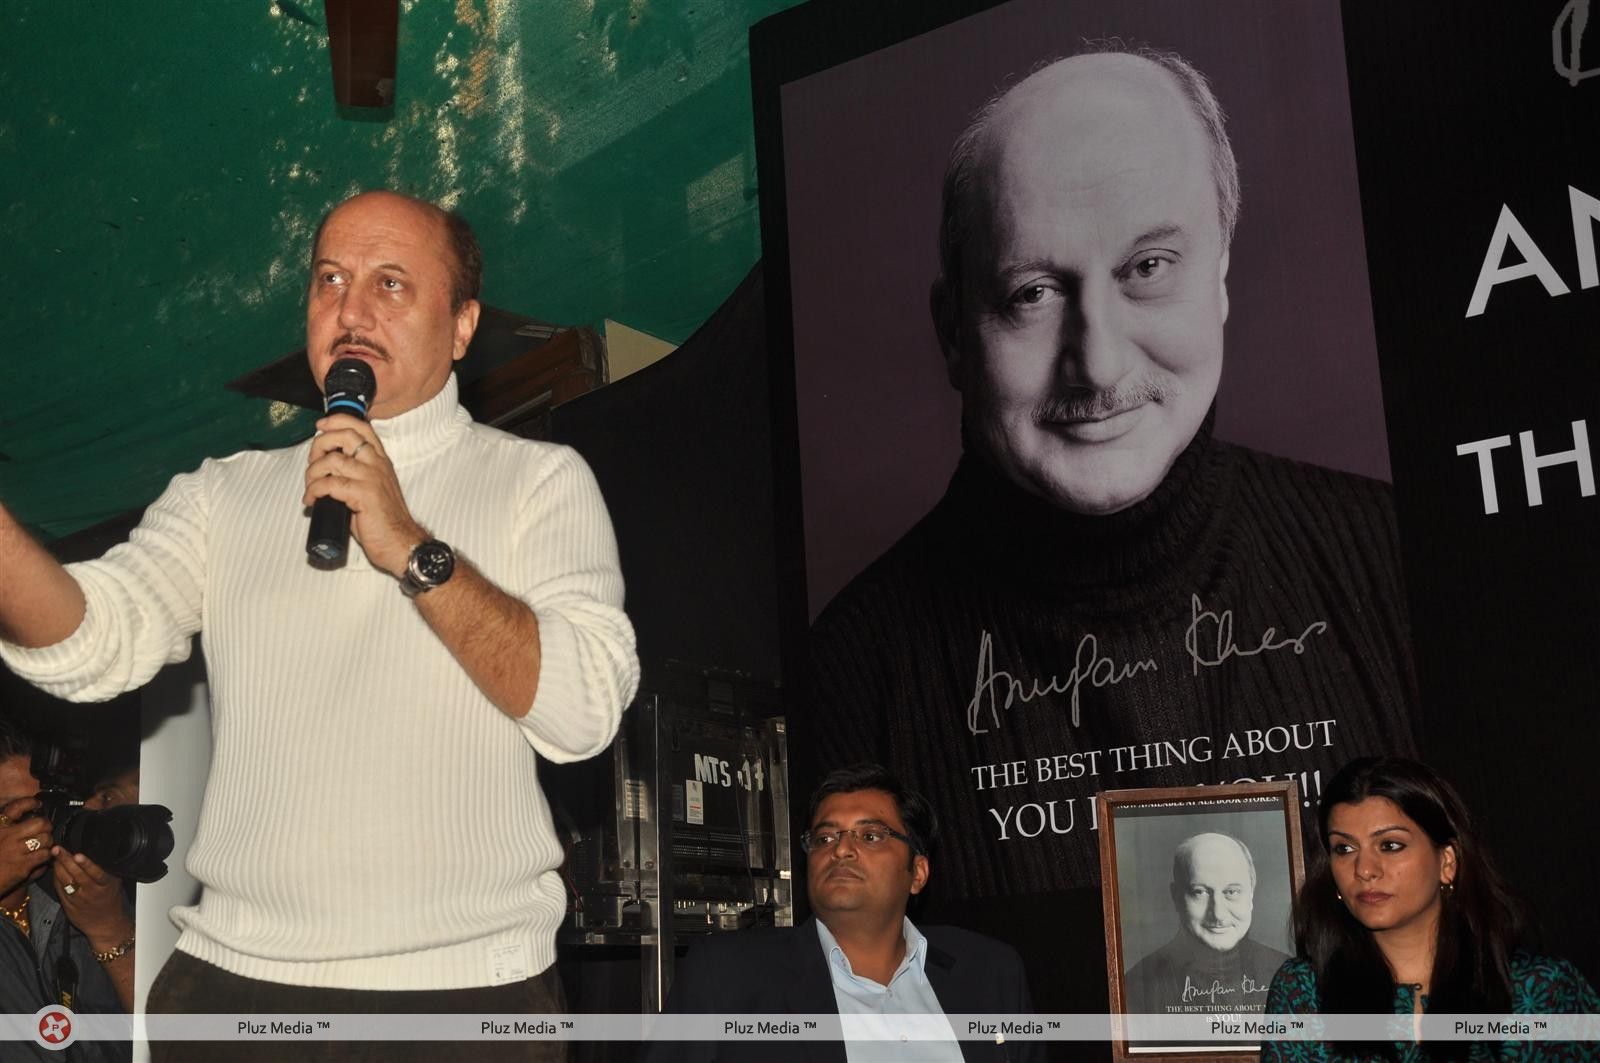 Photos - Amitabh Bachchan launches Anupam Kher's book | Picture 145143